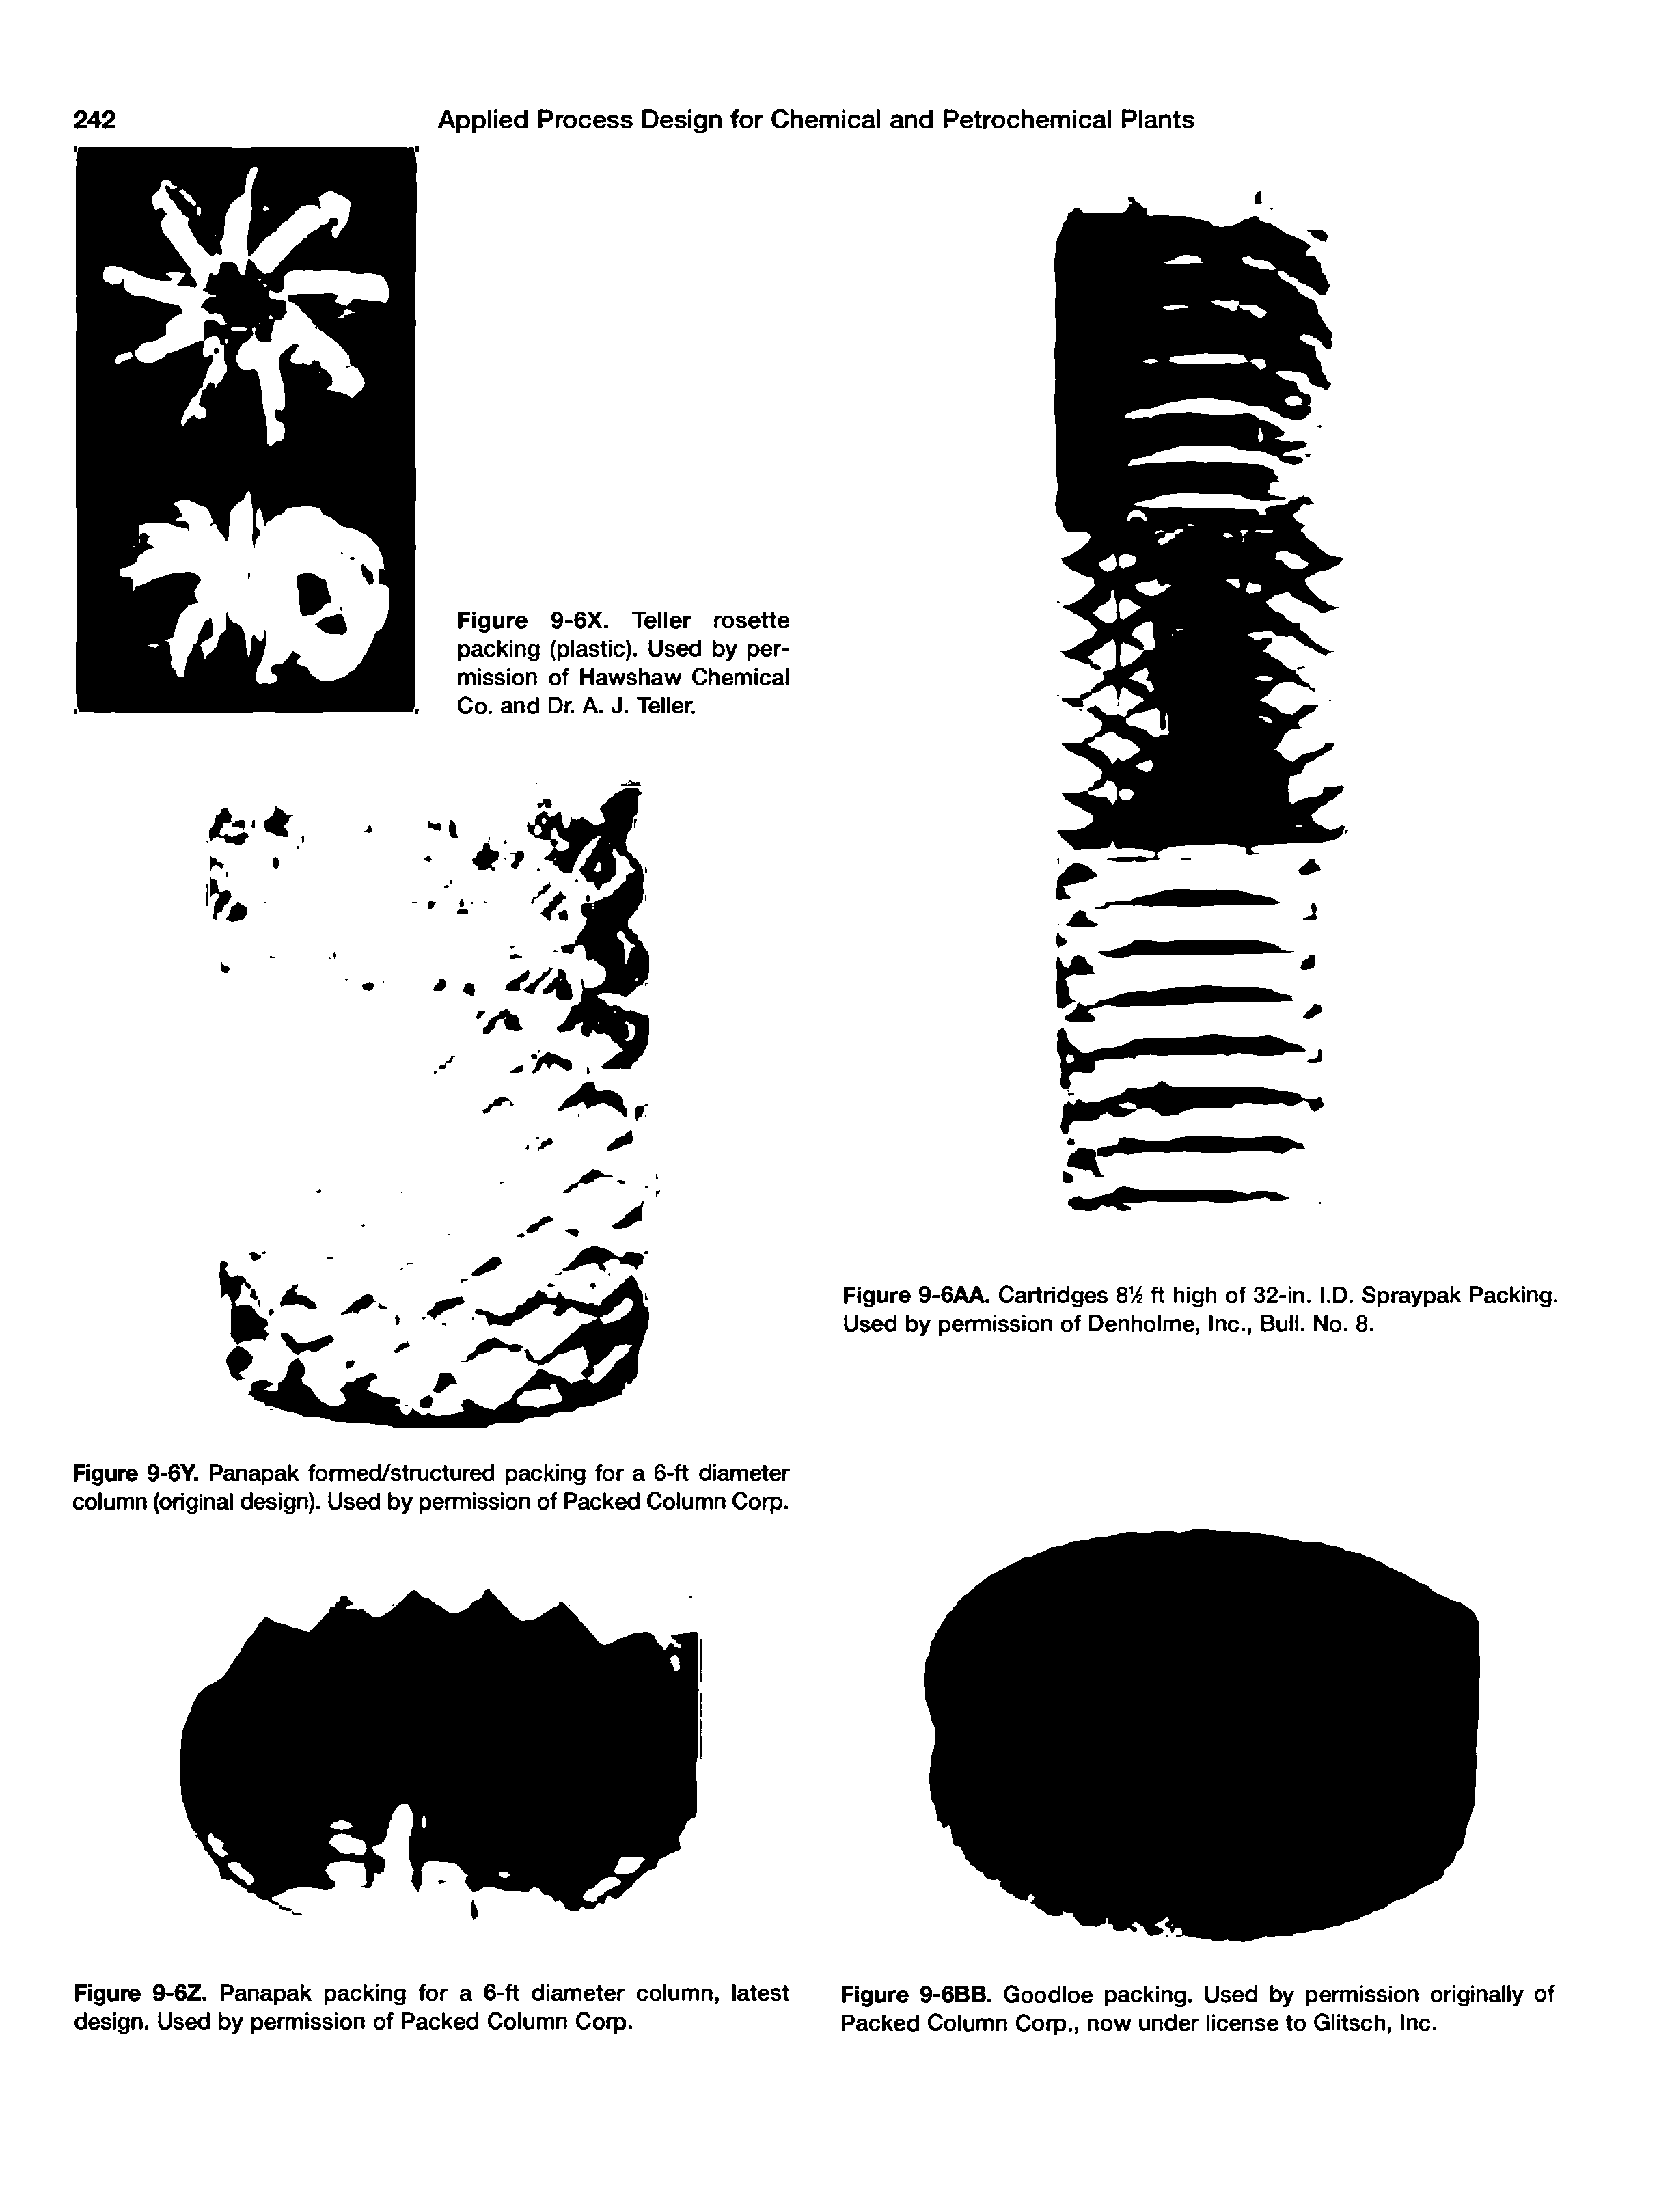 Figure 9-6Y. Panapak formed/structured packing for a 6-ft diameter column (original design). Used by permission of Packed Column Corp.